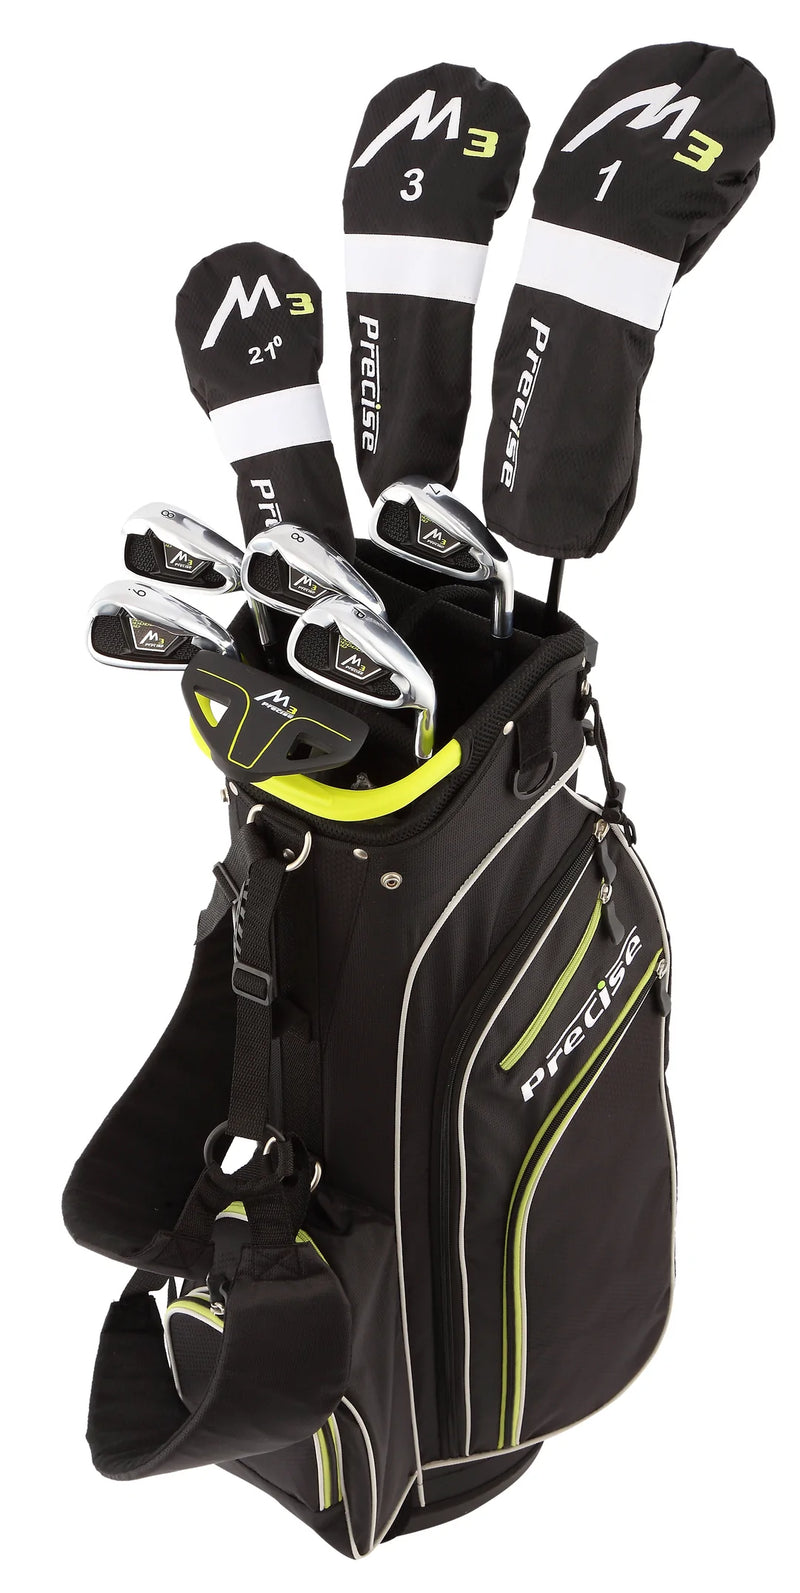 Load image into Gallery viewer, Precise M3 14 Piece Mens Tall Size Golf Set Green
